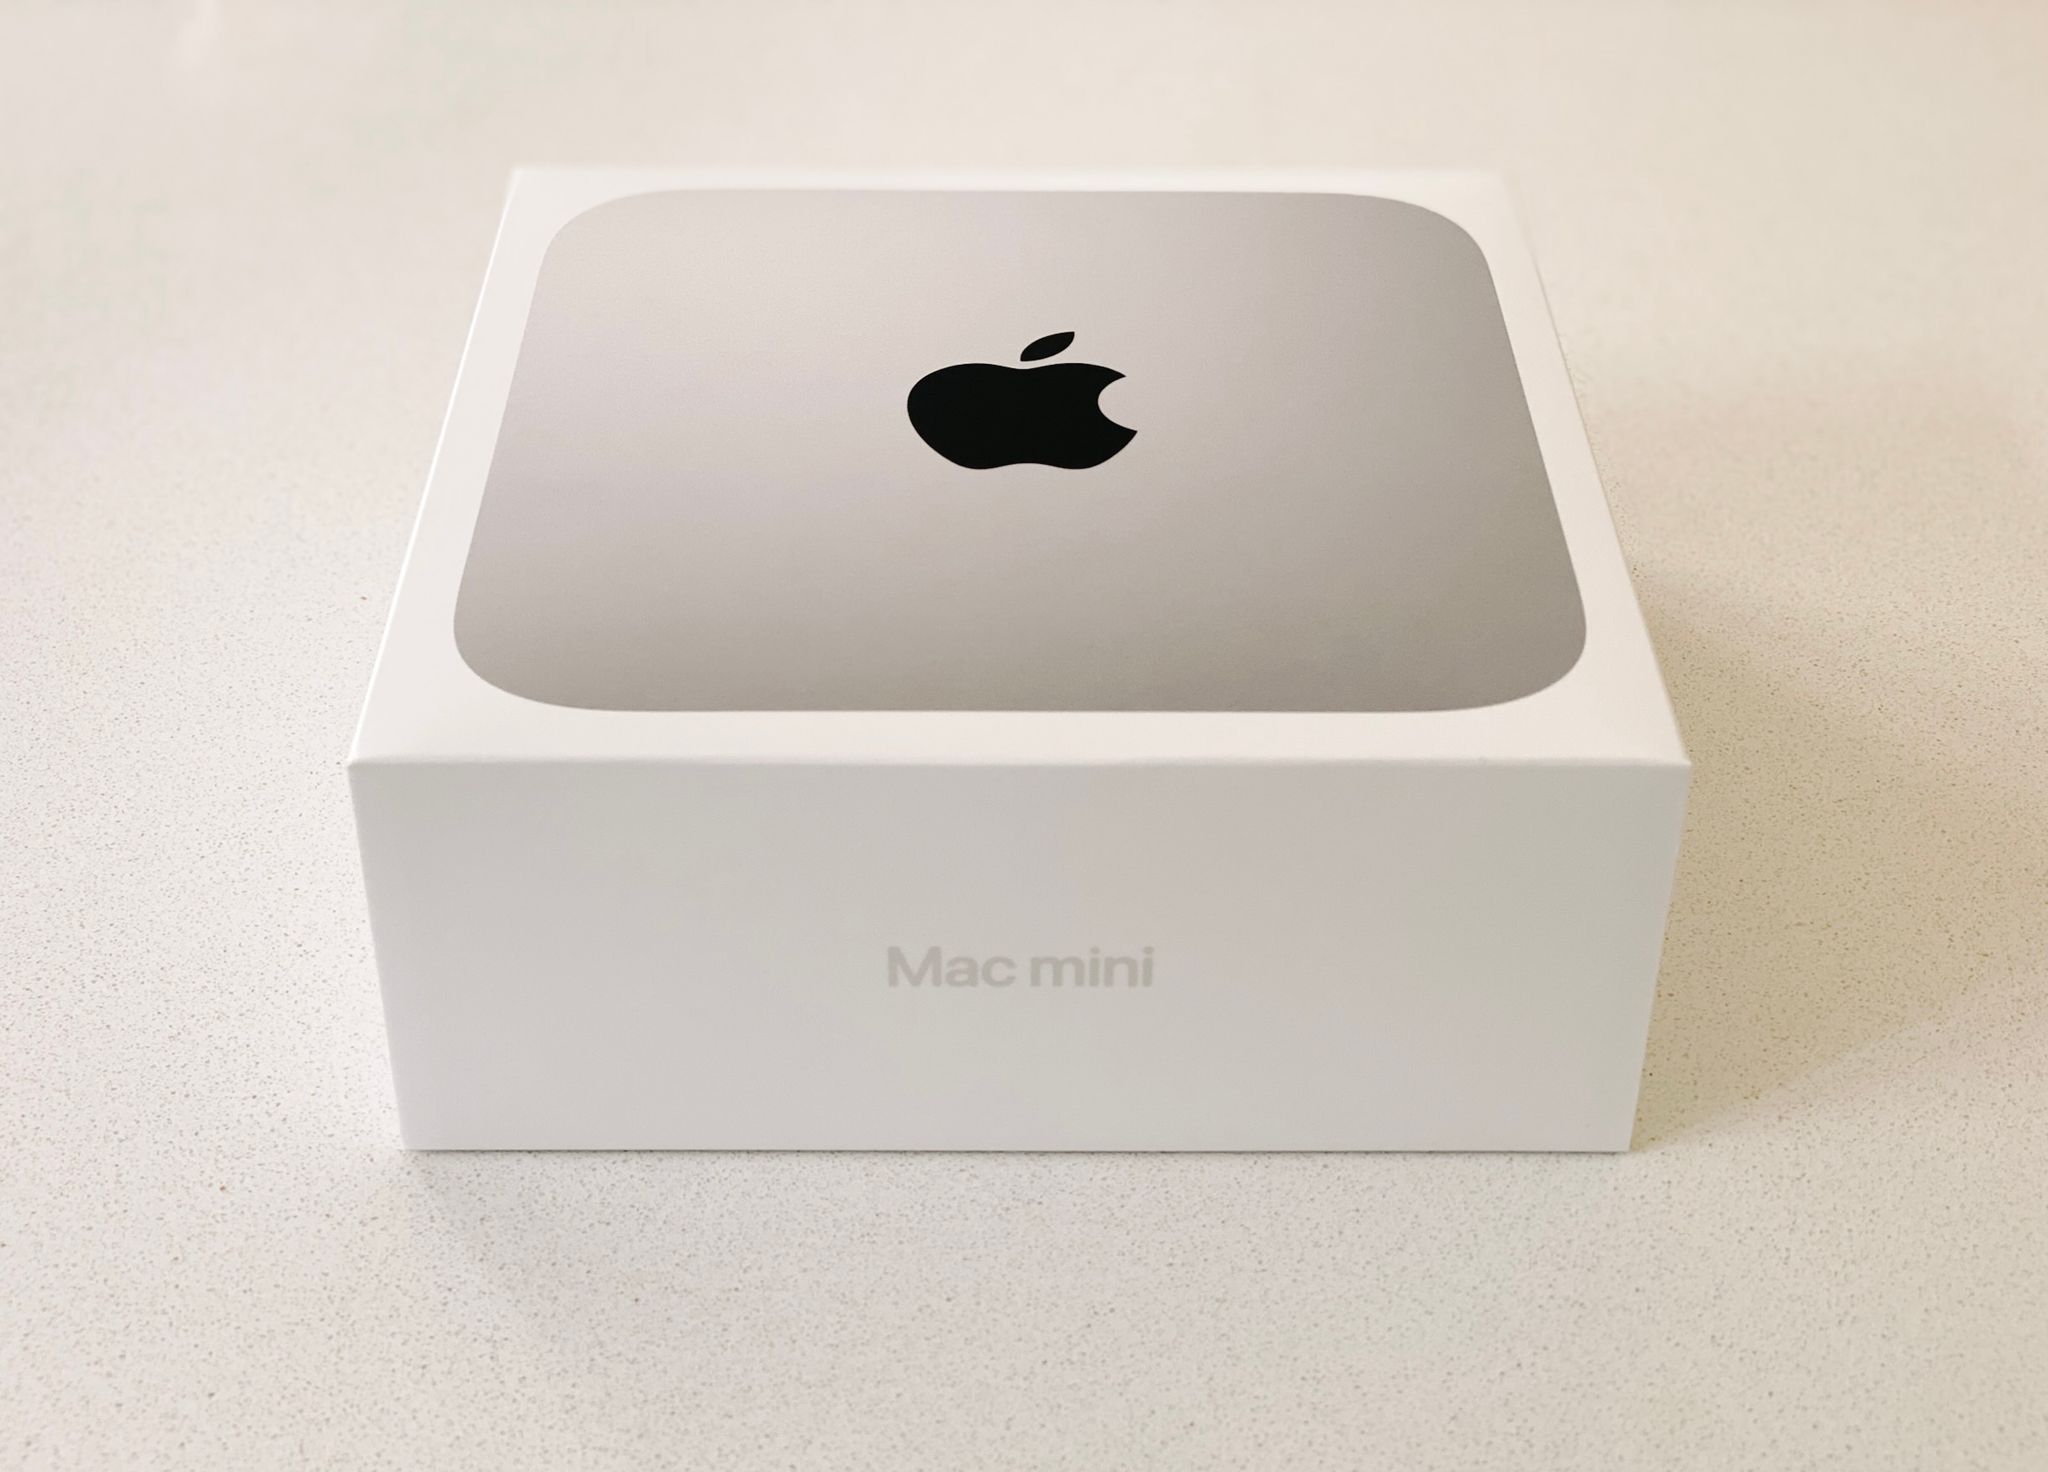 A photo of the box of a Mac mini. It's white and very minmal, with "Mac mini" written in silver on the front and a photo of the top of the Mac mini itself on the top of the box.